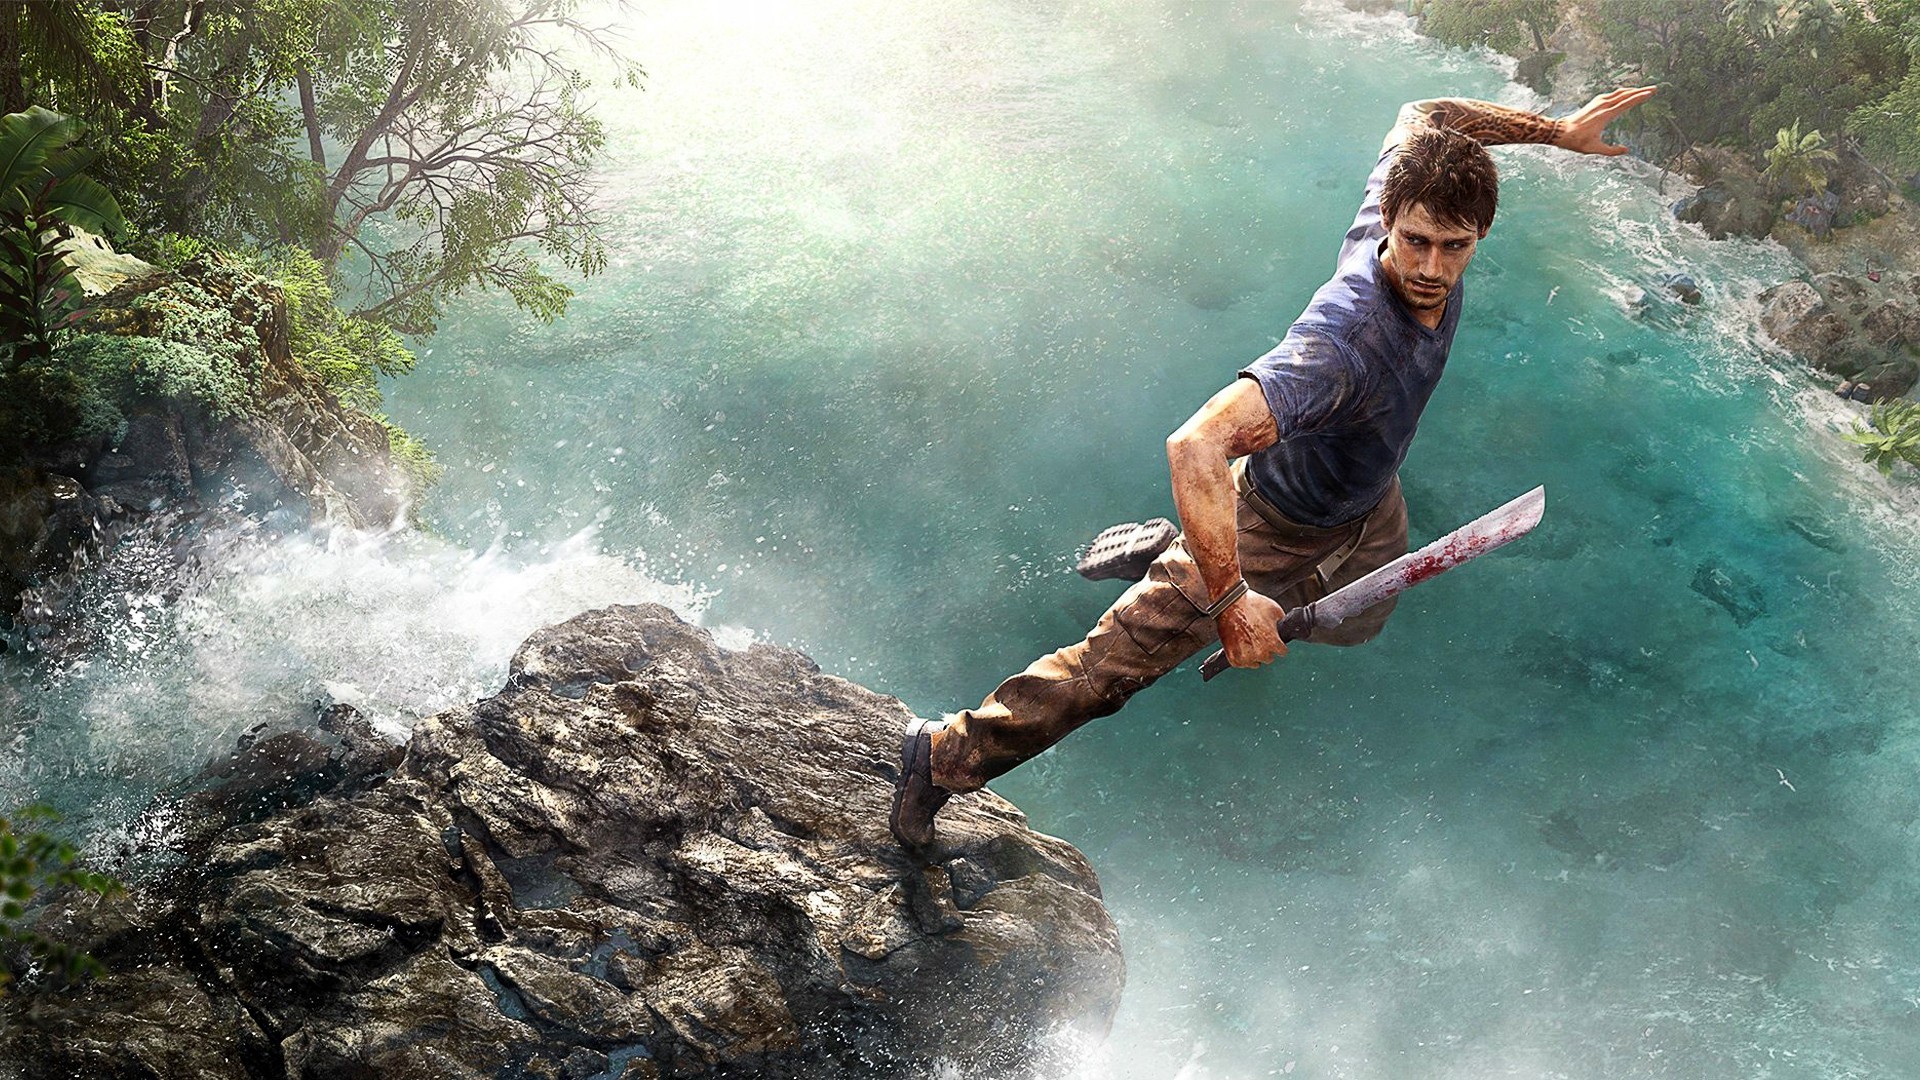 1920x1080 Far Cry 3 images far cry 3 jason 2 HD wallpaper and background photos